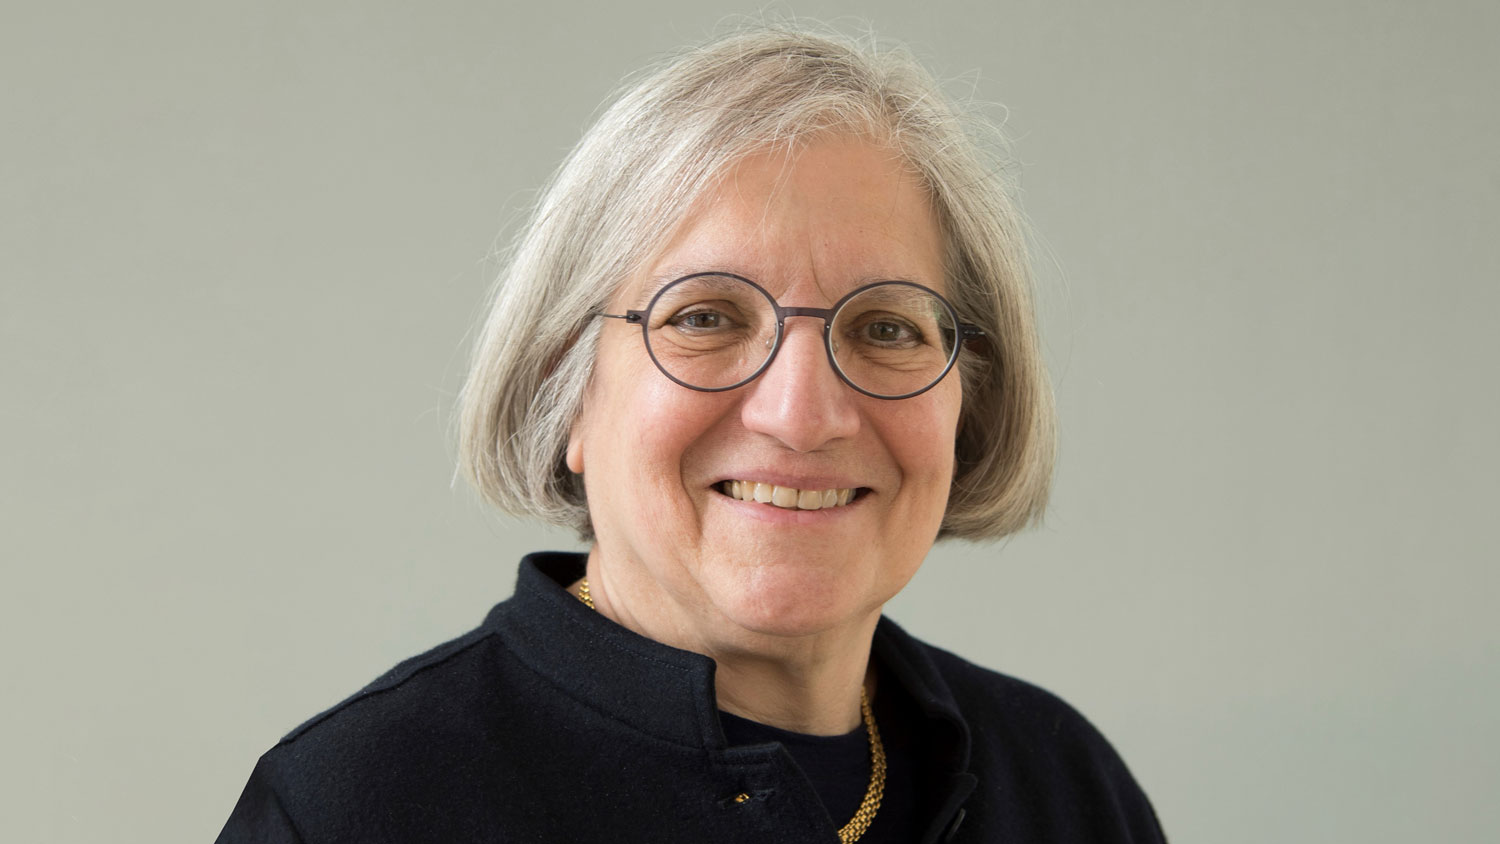 Woman with grey hair and glasses smiling